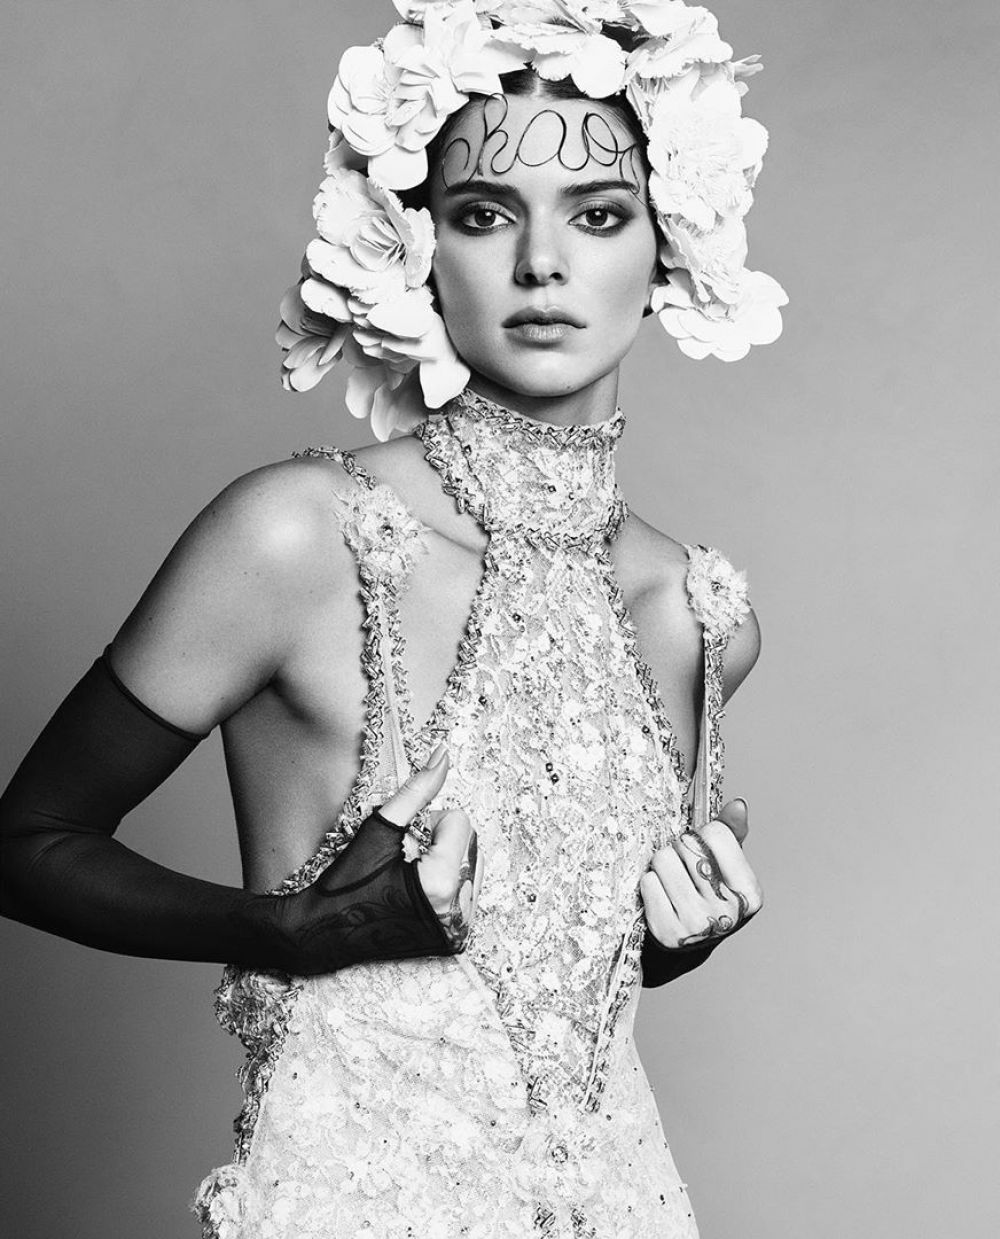 kendall-jenner-for-chaos-sixtynine-no5-chanel-issue-by-luigi-lango-august-2020-2.jpg